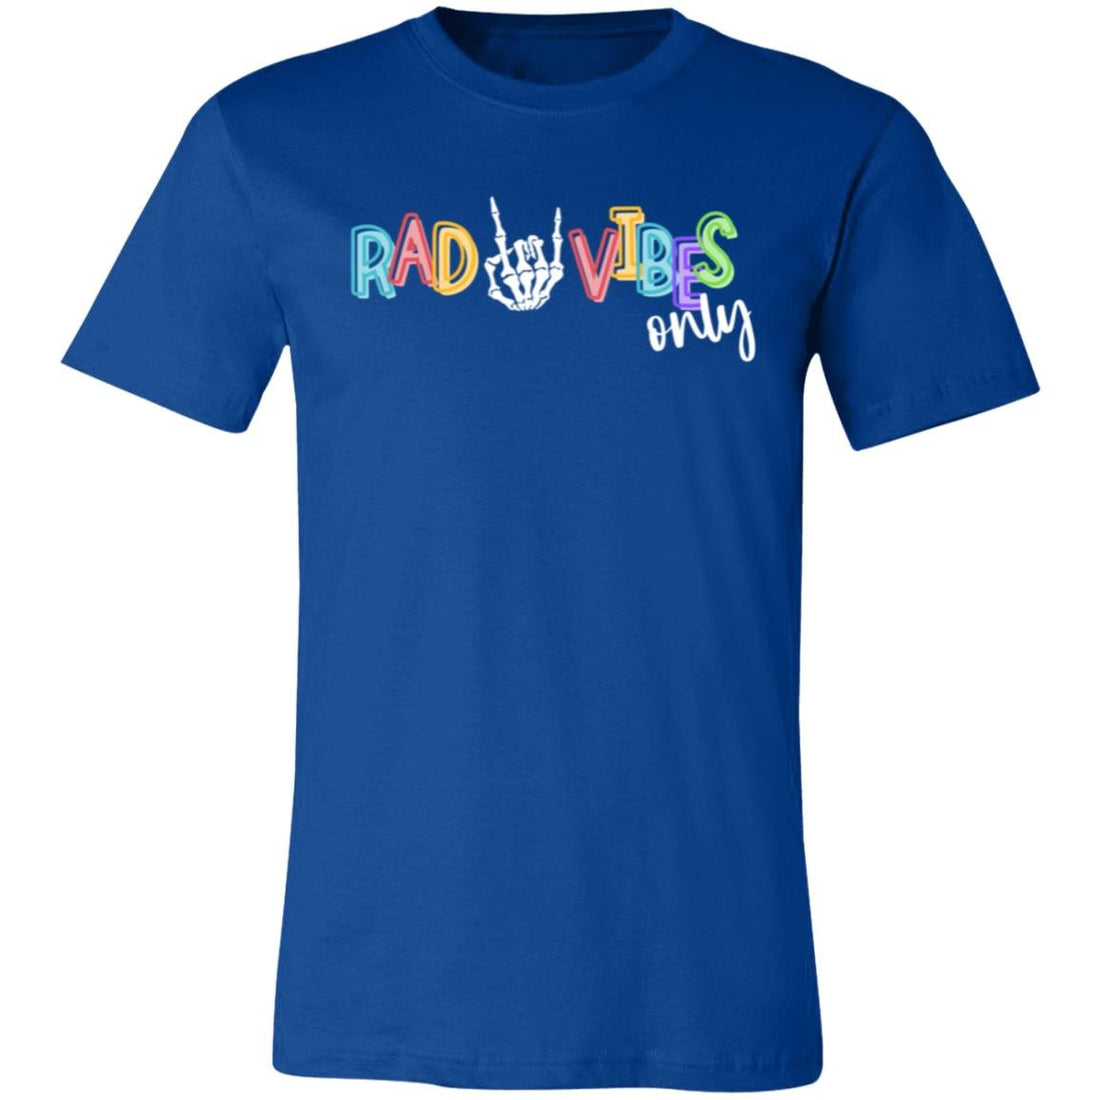 Rad Vibes Only Unisex Jersey Short-Sleeve T-Shirt - T-Shirts - Positively Sassy - Rad Vibes Only Unisex Jersey Short-Sleeve T-Shirt